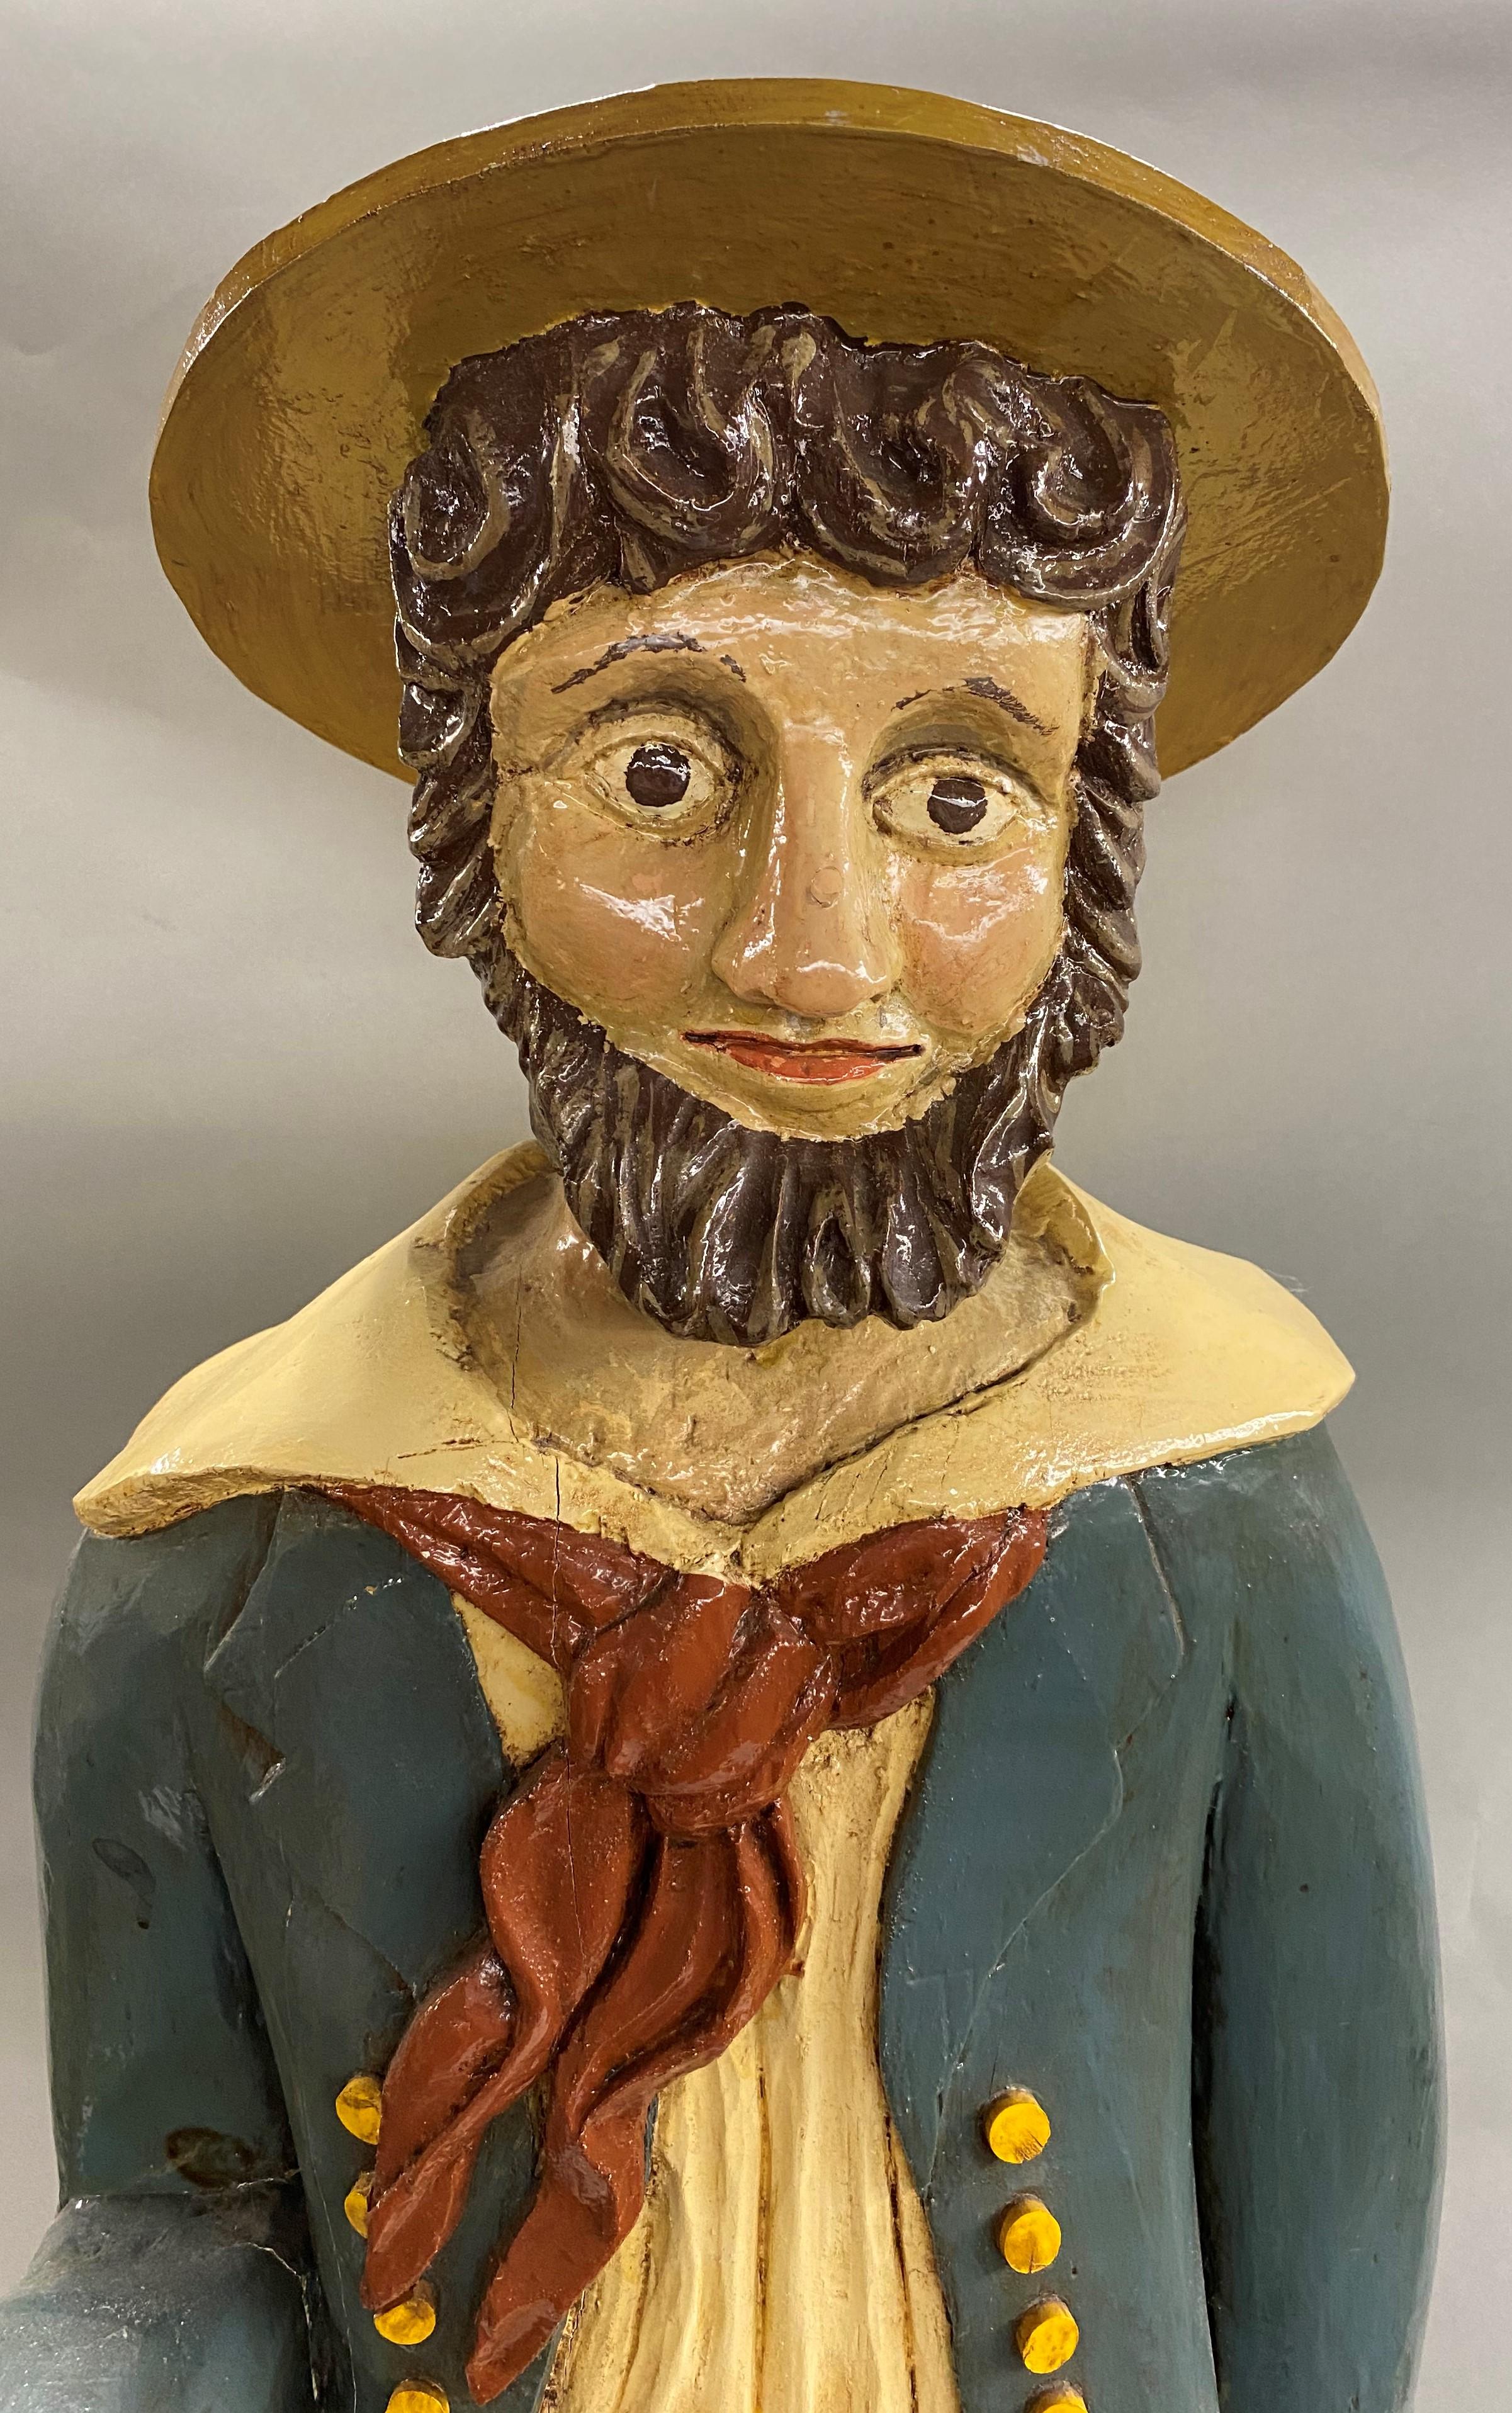 A fine 20th century American School hand carved folk art polychrome ship’s captain with beard and hat on wooden base, monogrammed on base “JRW 85”. Acquired with several other carved figures with full artist name shown on base. Very good overall